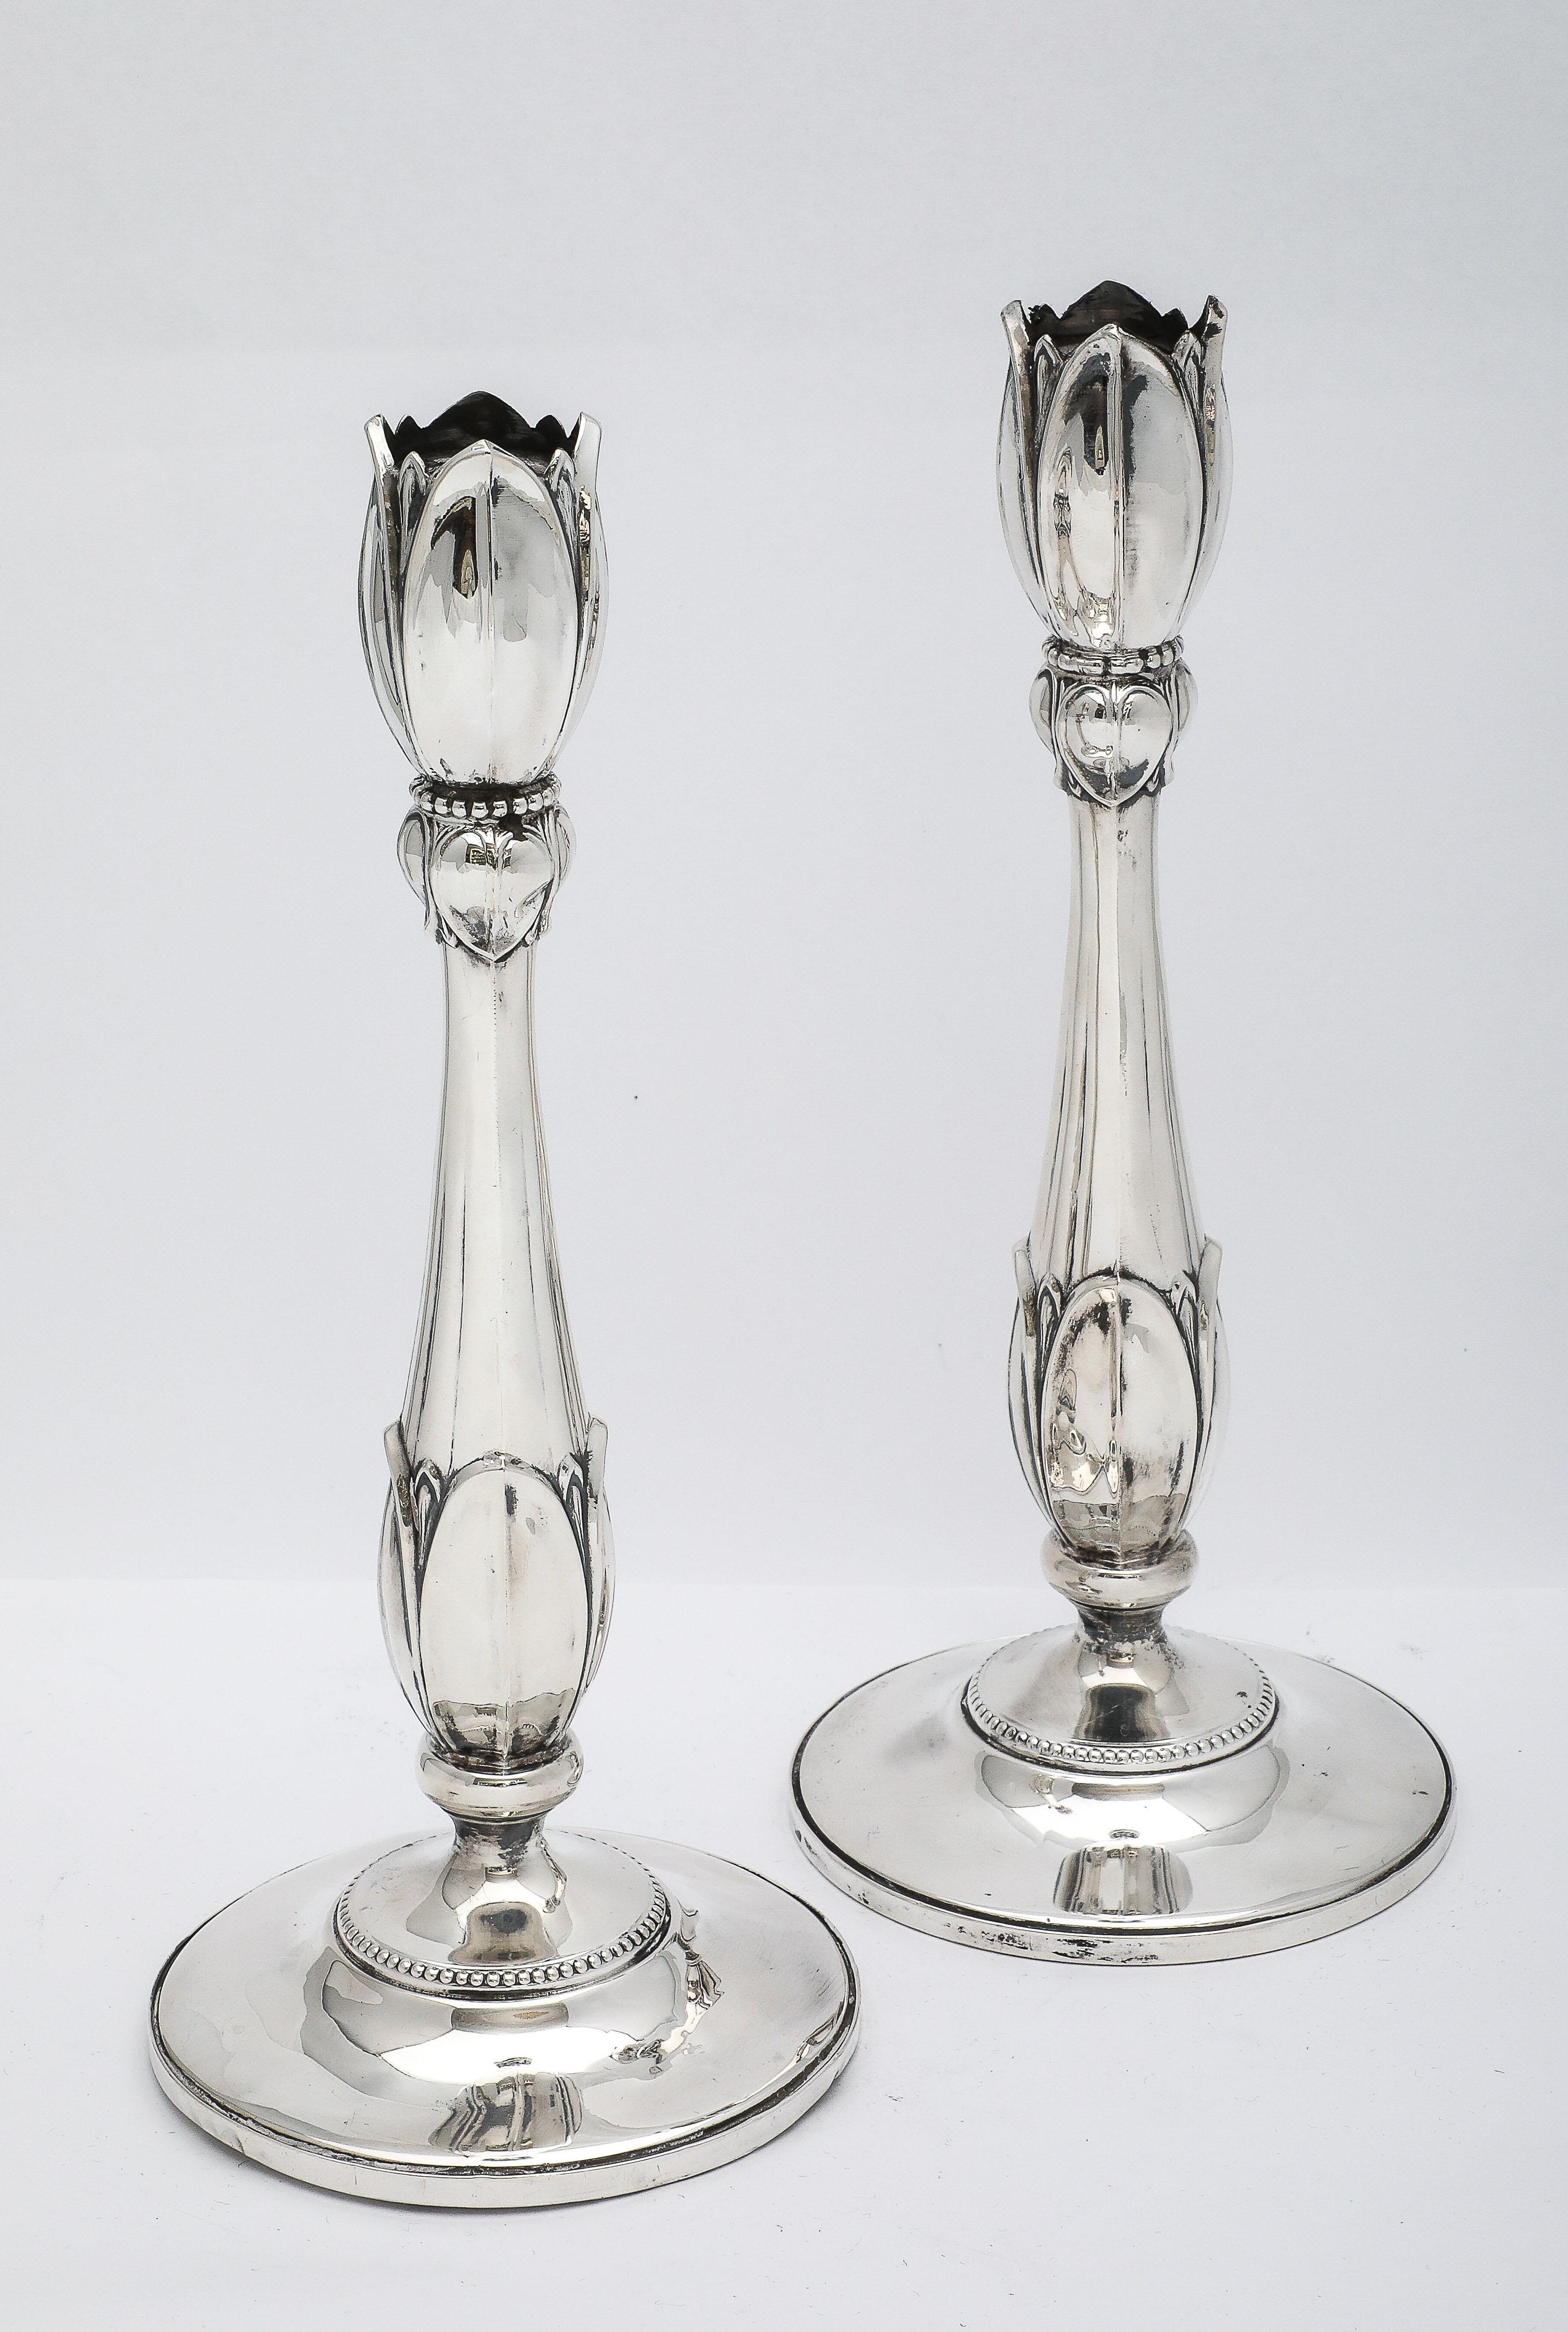 Rare Pair of Tall Sterling Silver Art Nouveau-Style Flower-Form Candlesticks For Sale 12